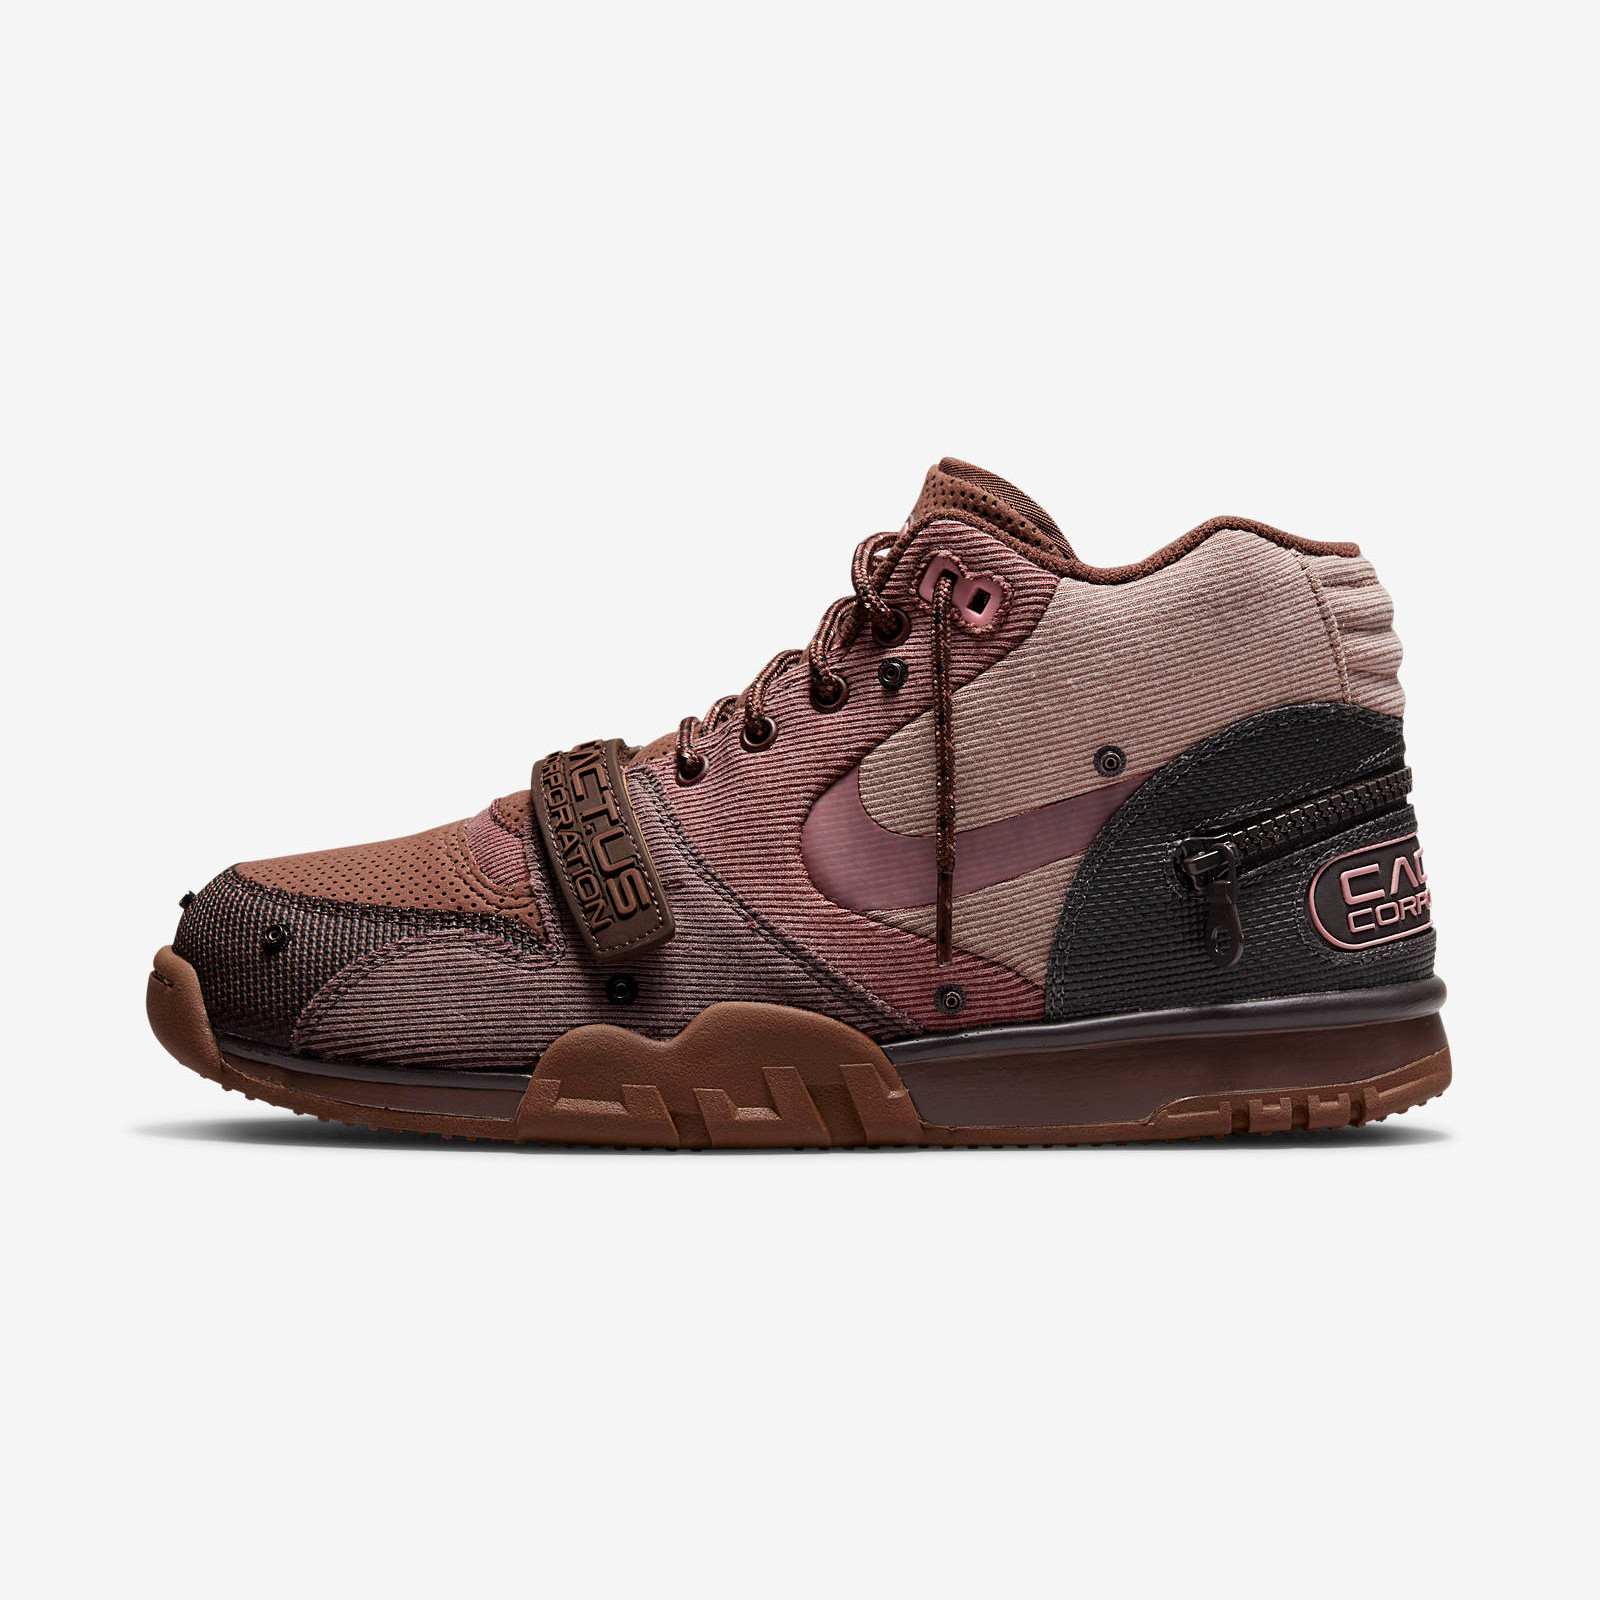 Nike x CACT.US CORP
Air Trainer 1
« Archaeo Brown »